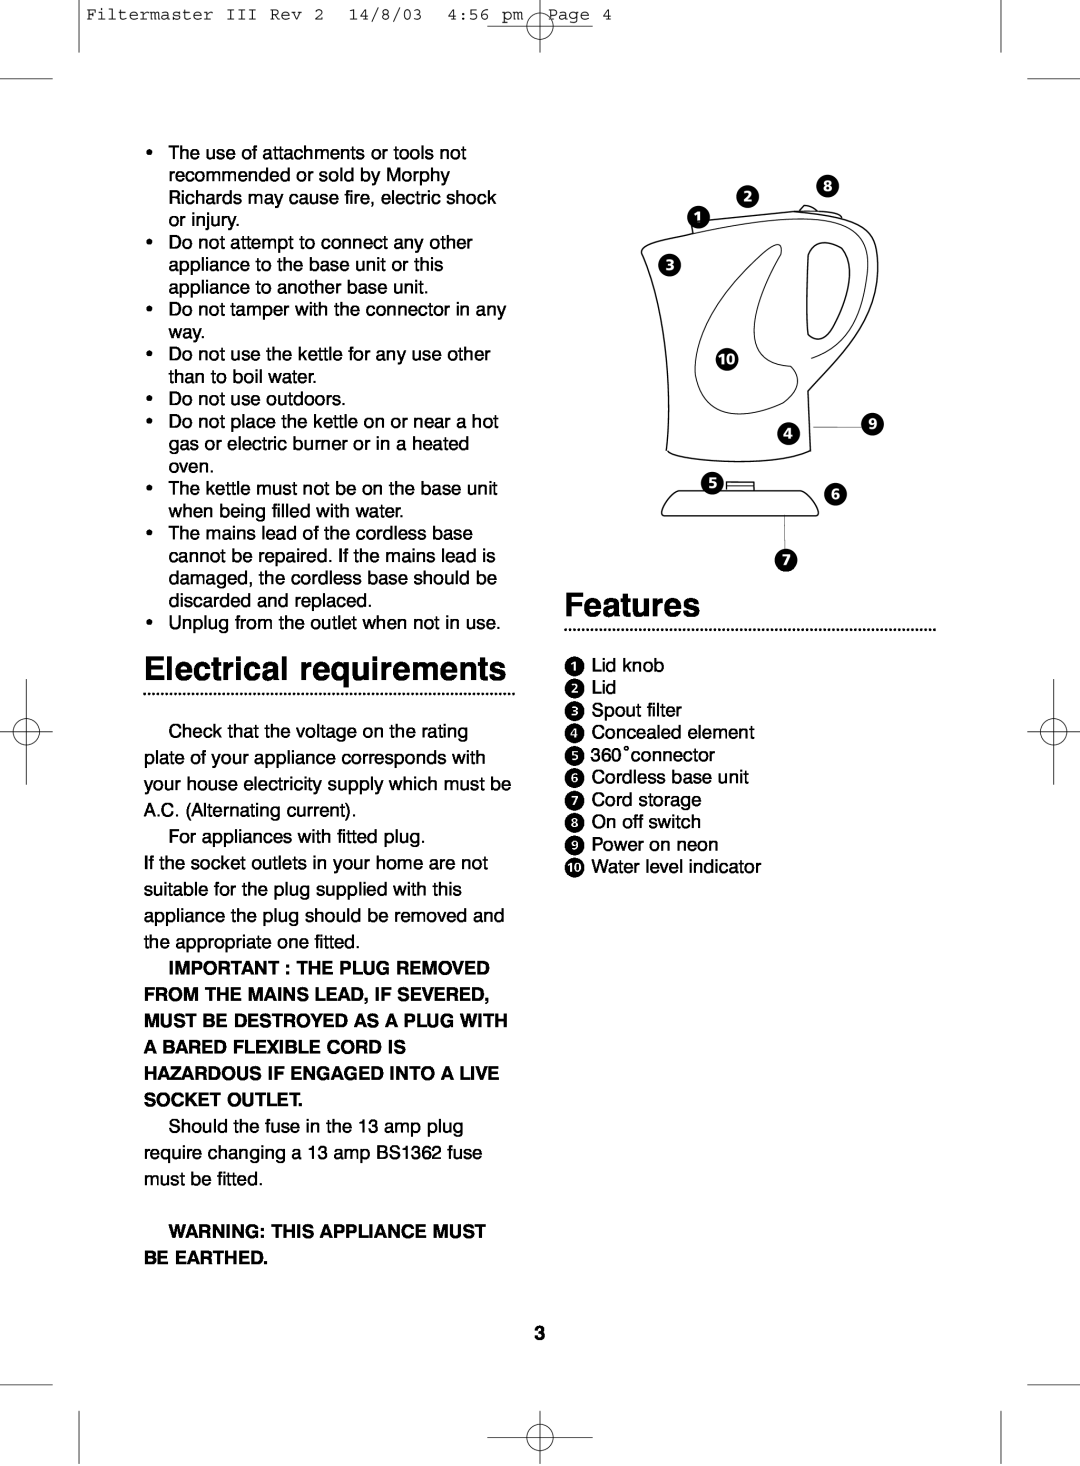 Morphy Richards III manual Electrical requirements, Features, Warning This Appliance Must Be Earthed, ¤ · ⁄ ‹ „ › ‚ ﬁﬂ ‡ 